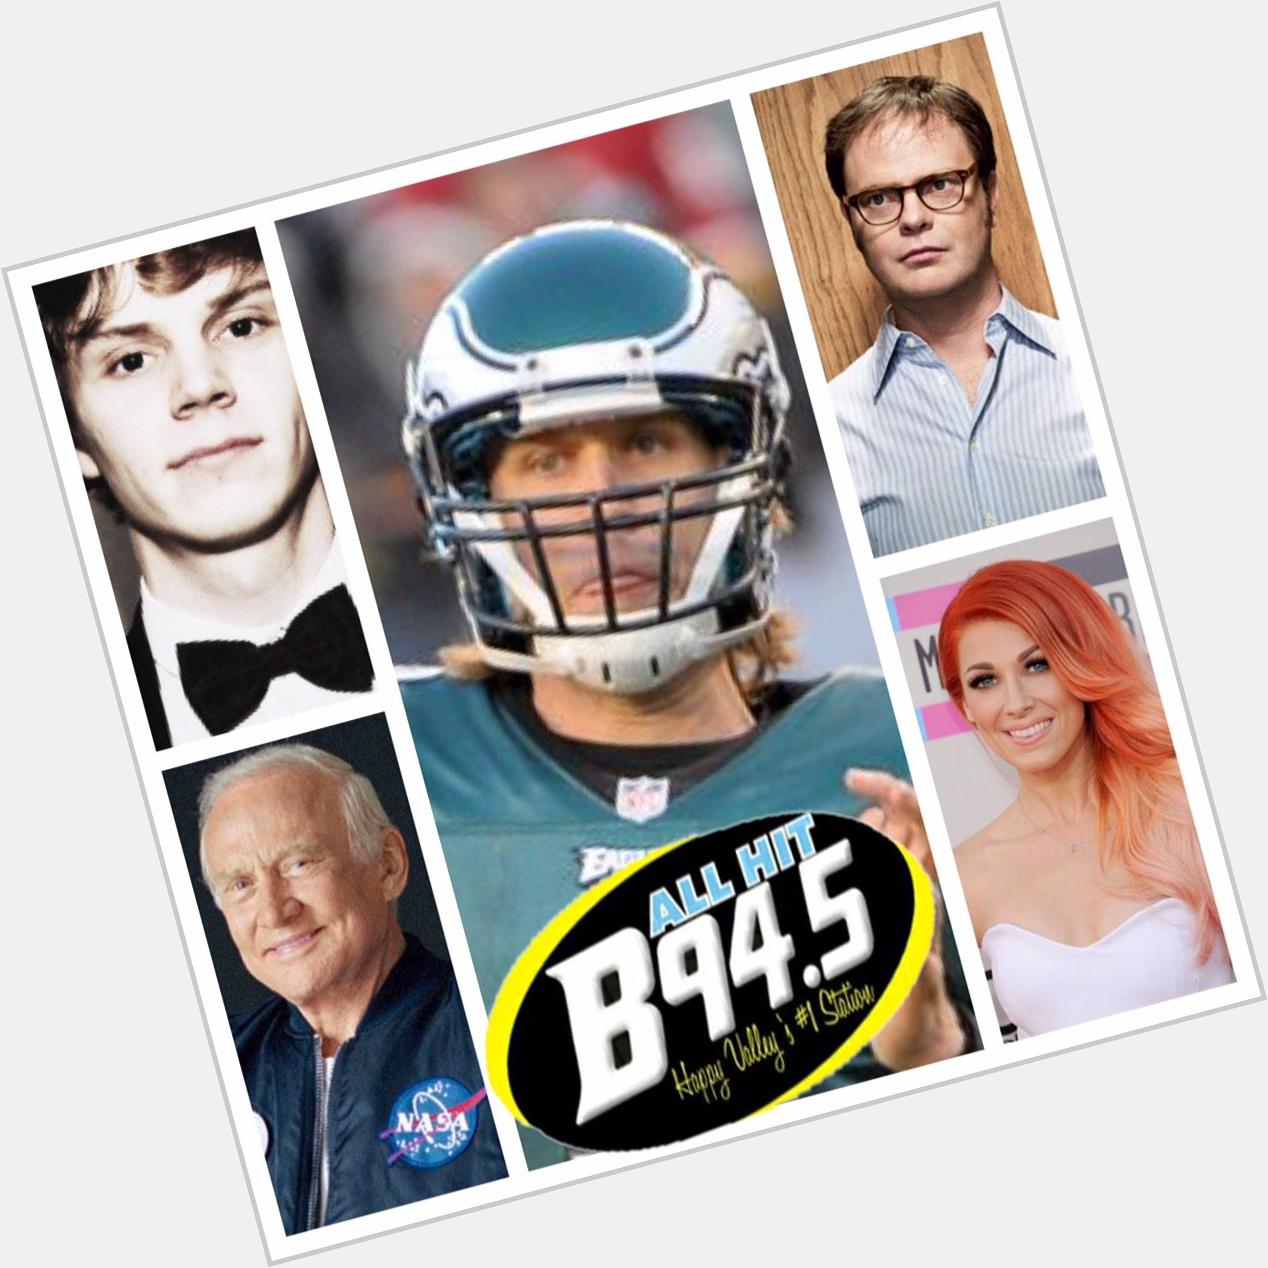 Happy birthday to these amazing celebrities!   Nick Foles and Buzz Aldrin! 